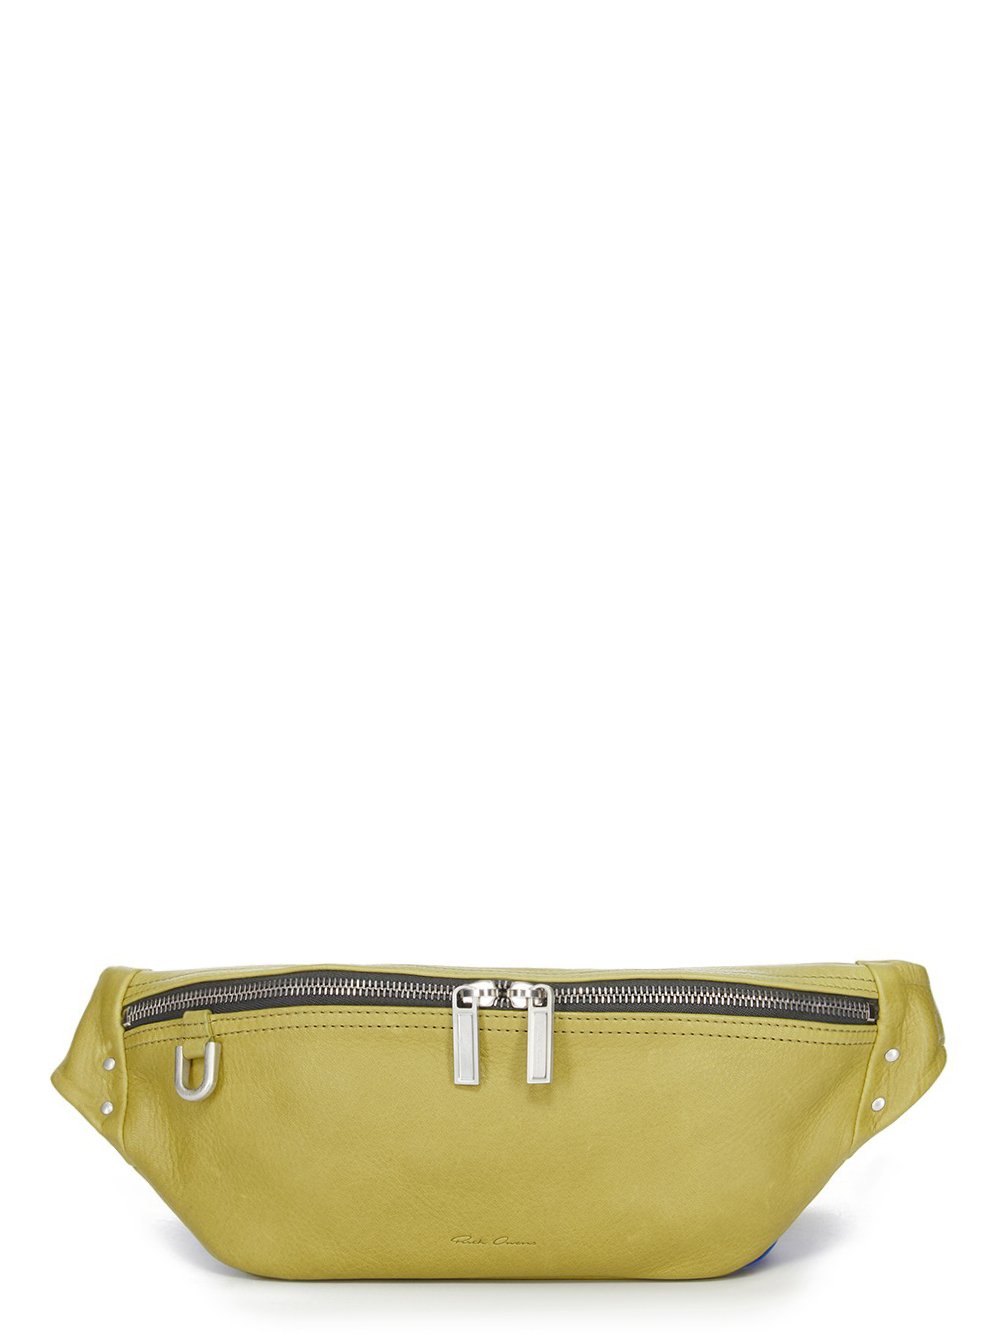 RICK OWENS FW23 LUXOR GEO BUMBAG IN ACID YELLOW SOFT GRAIN COW LEATHER